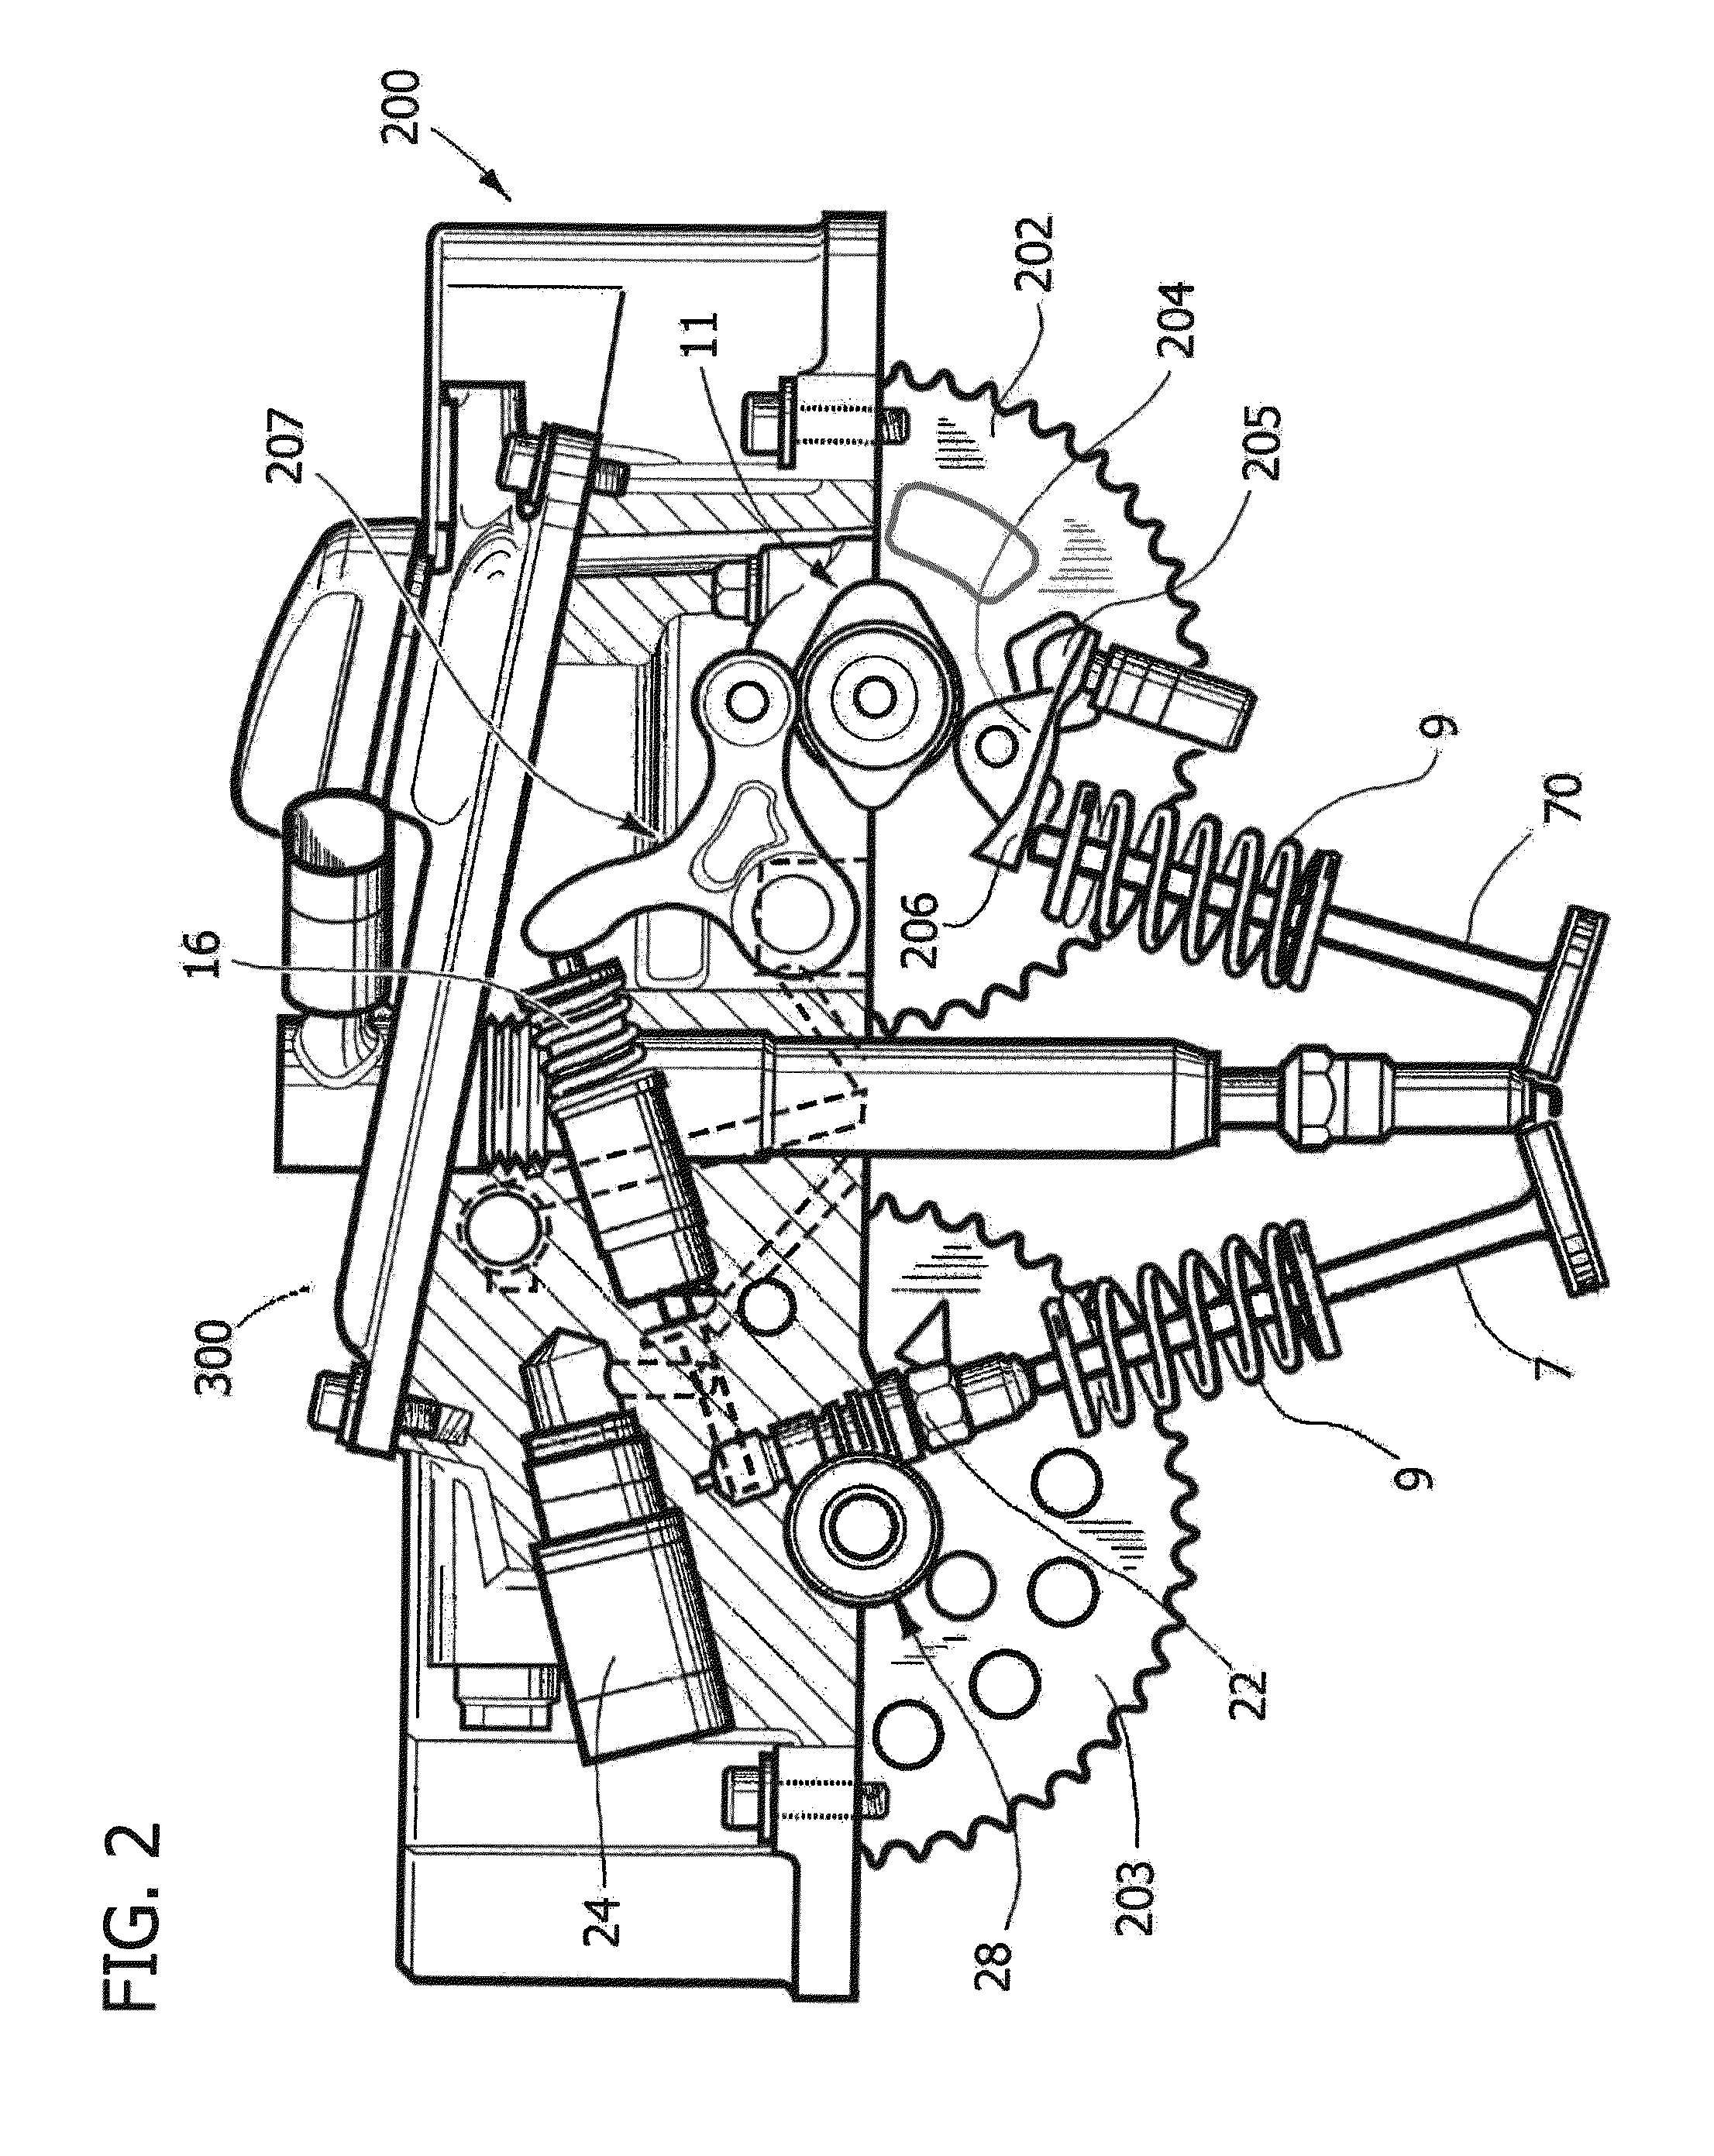 Spark ignition internal combustion engine having intake valves with variable actuation and delayed closure